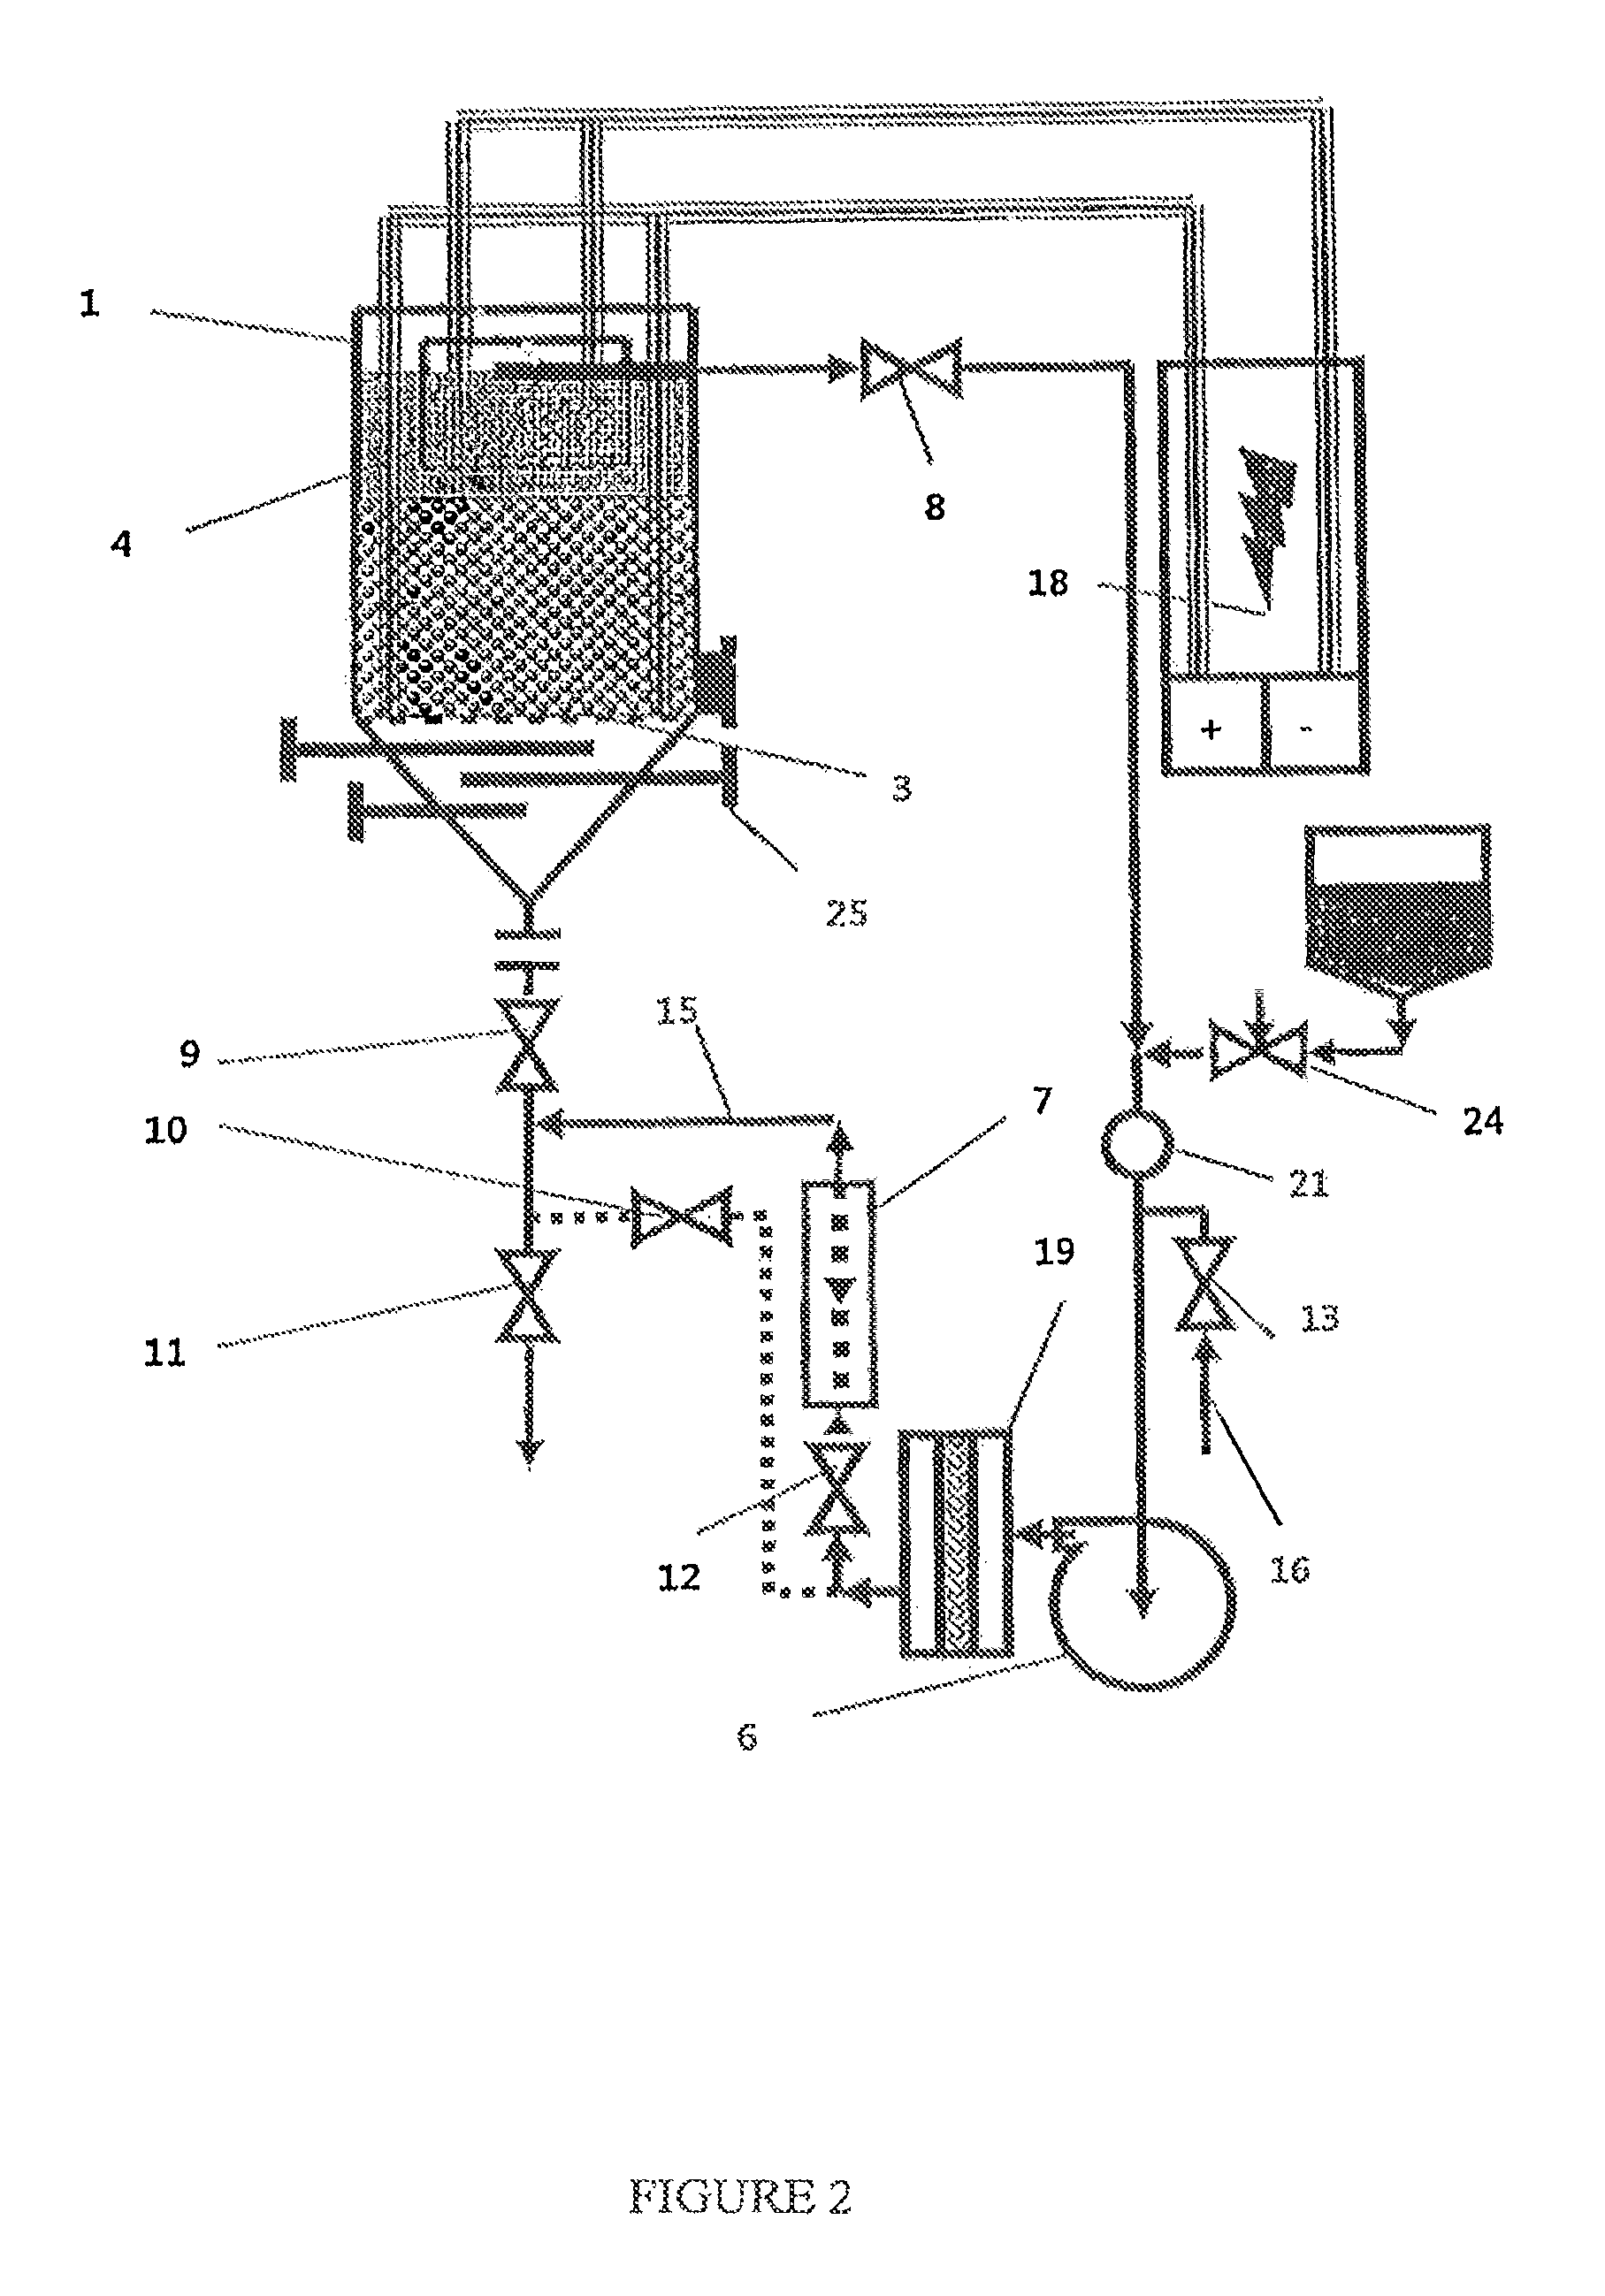 Method and apparatus for extracting noble metals from inorganic granular waste catalysts